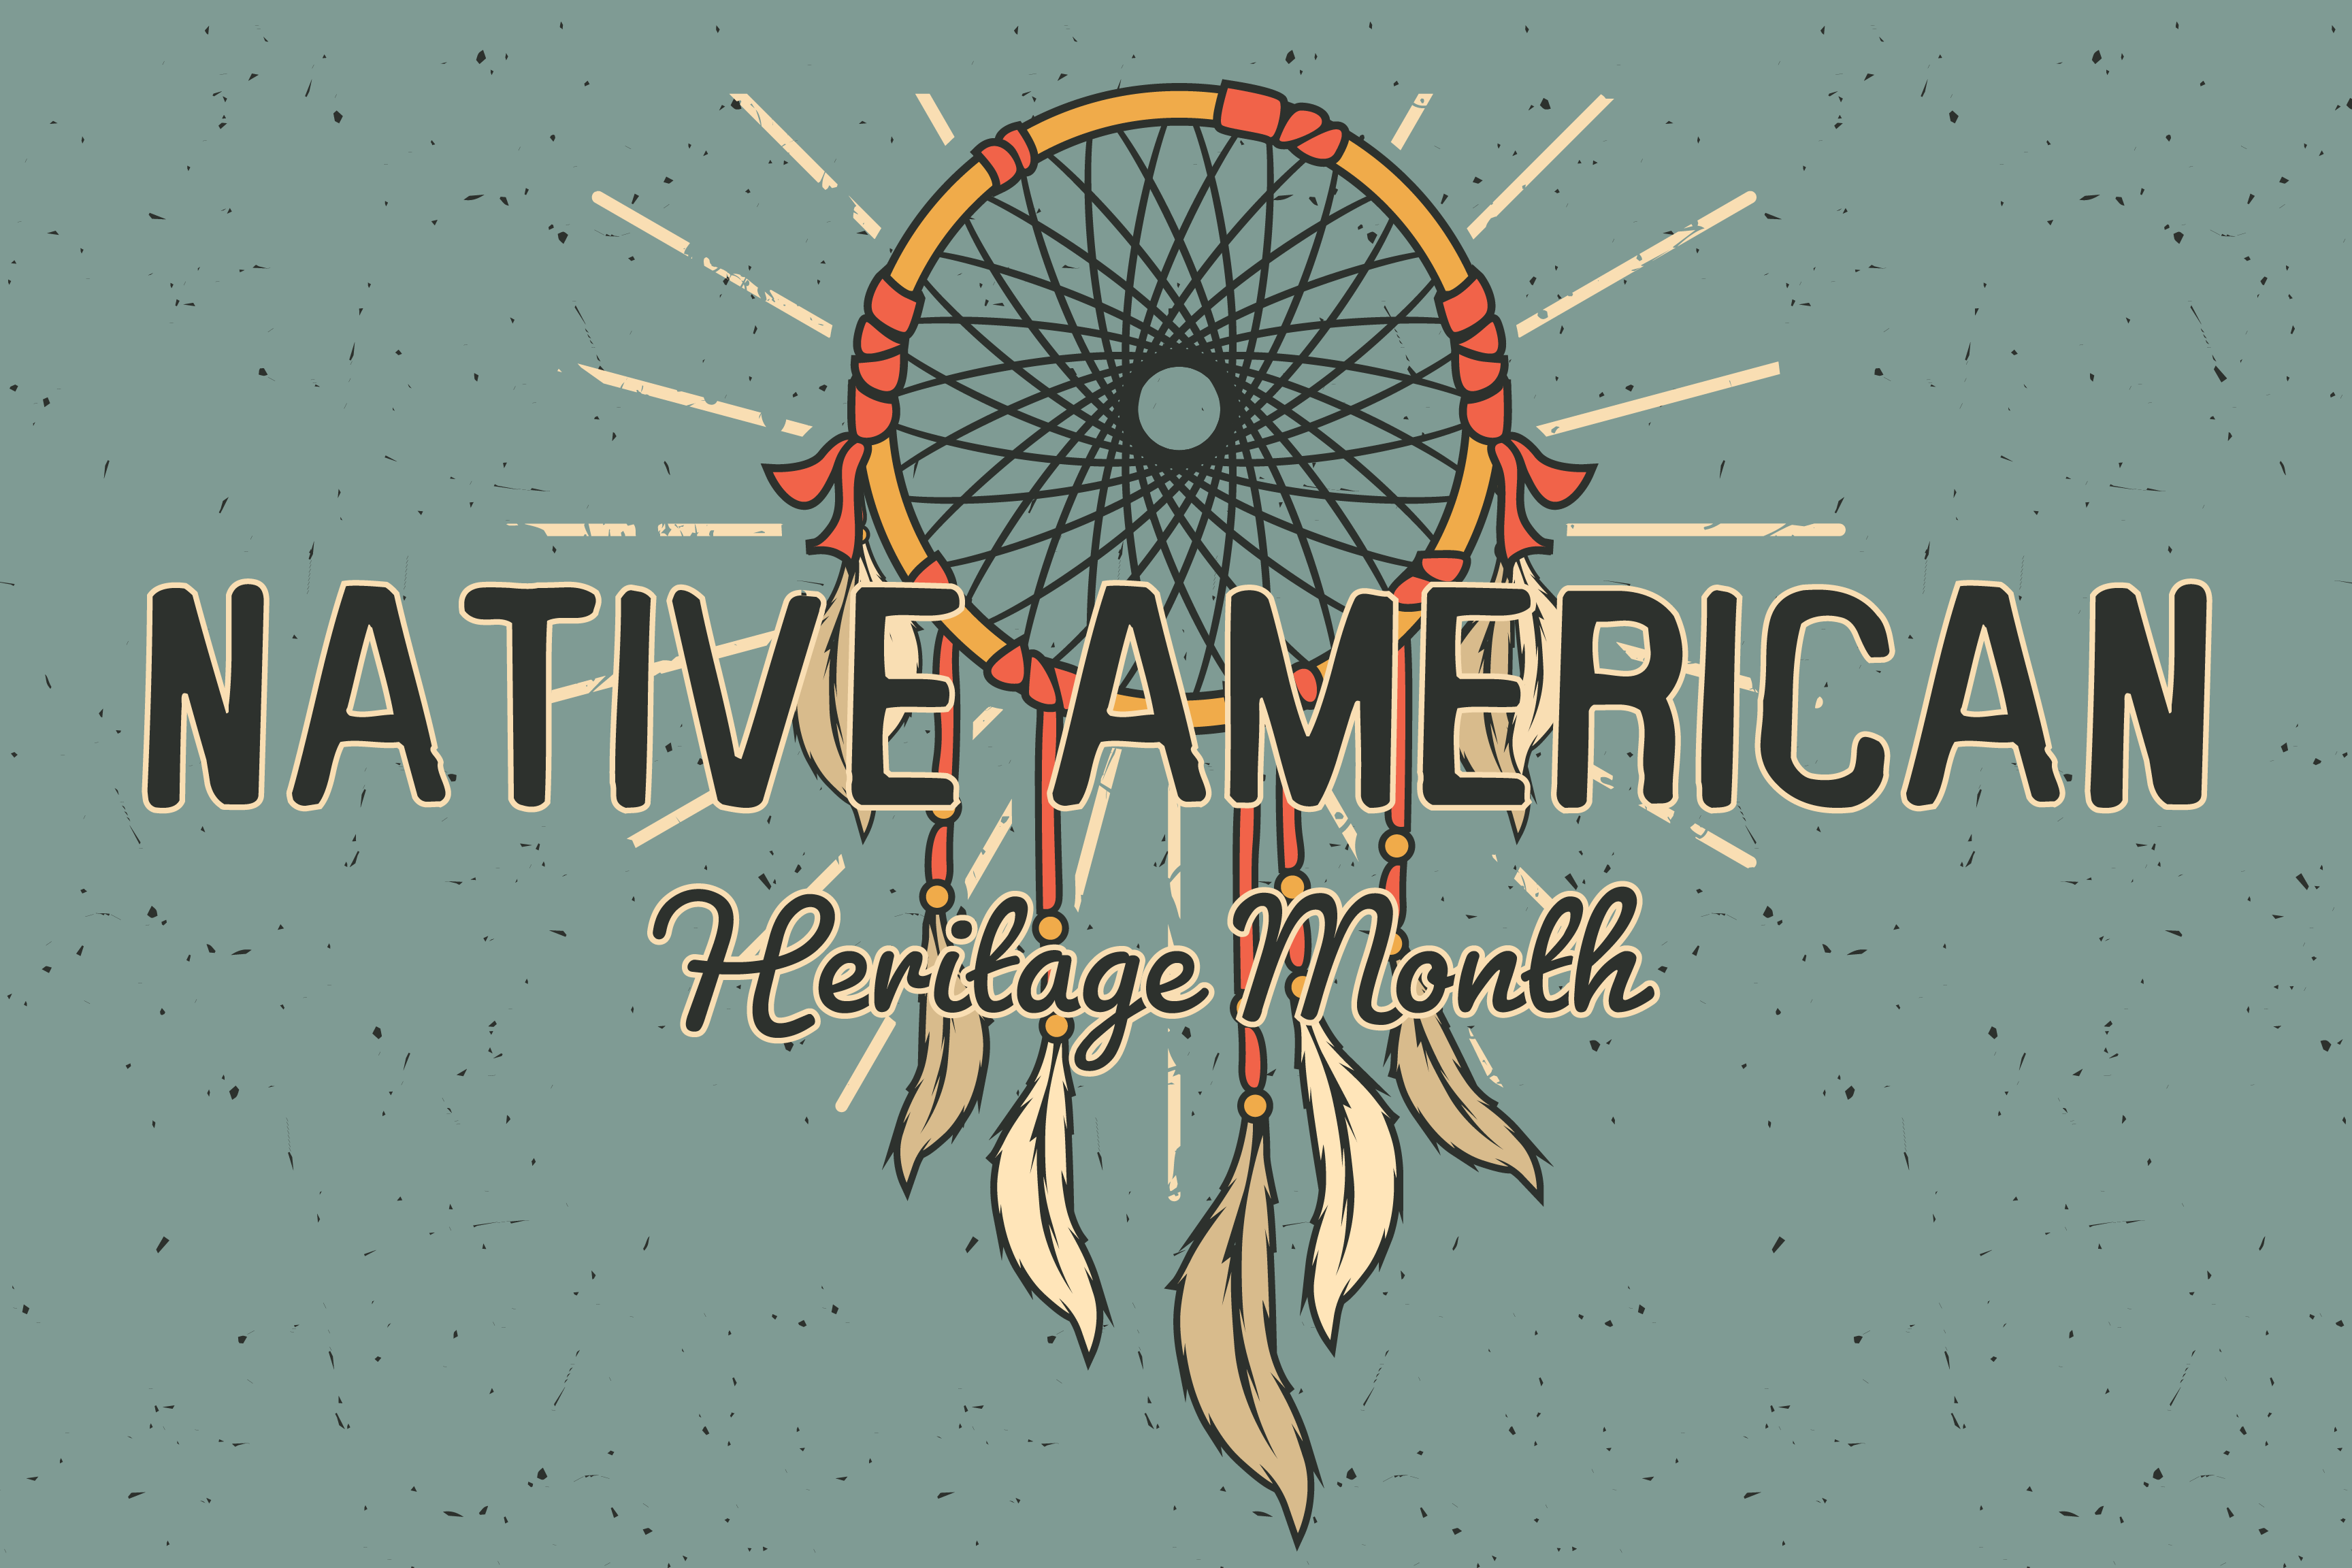 Native American Heritage Month to raise awareness